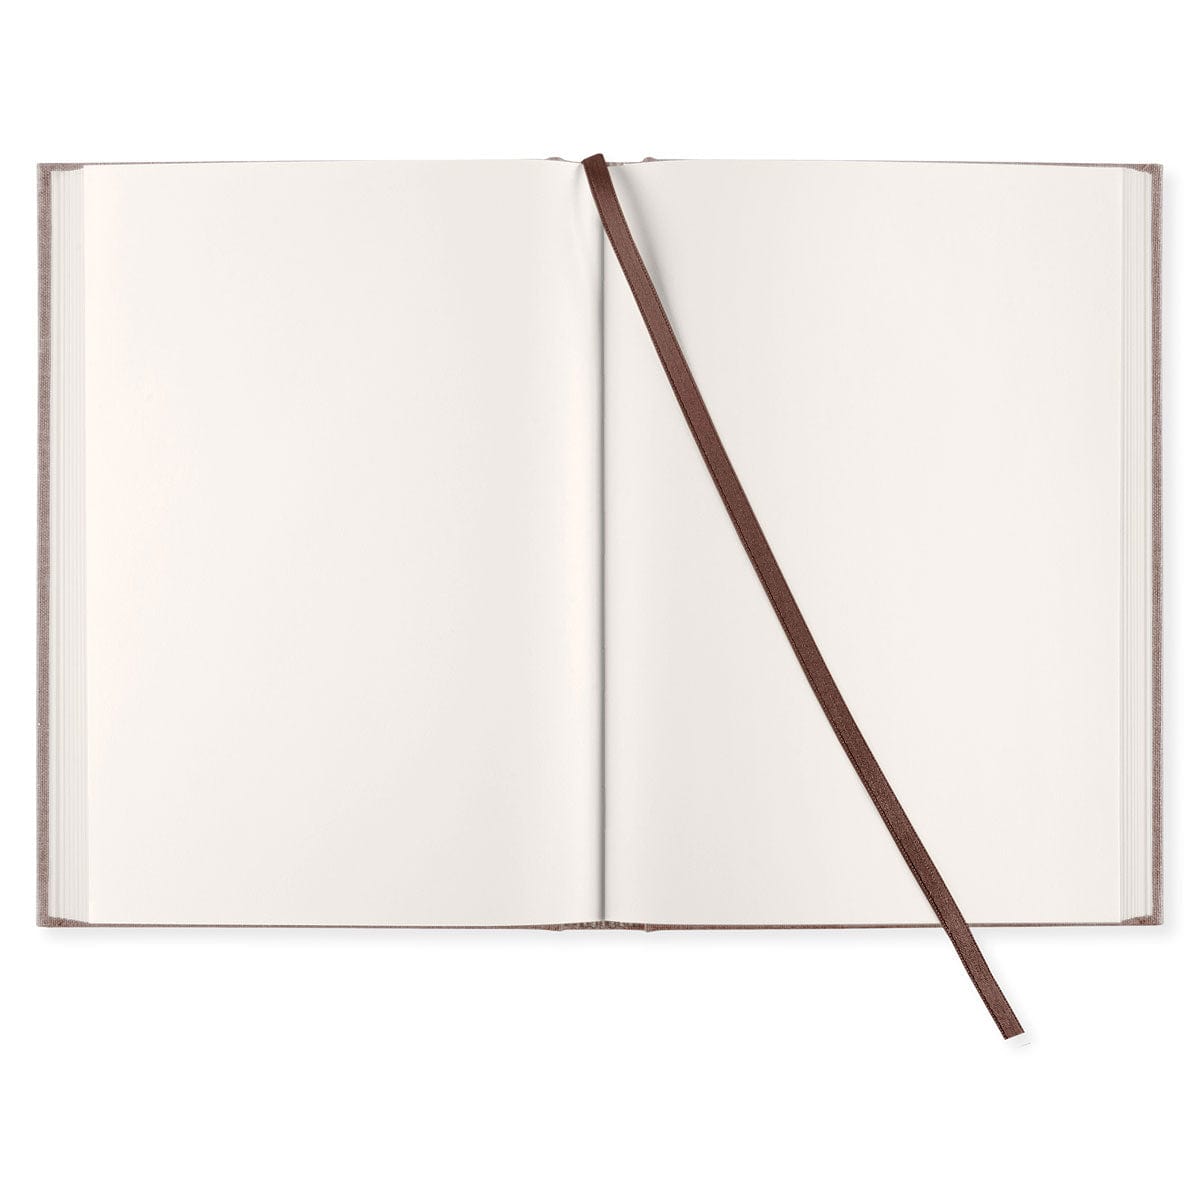 PaperStyle Paperstyle NOTEBOOK A5 128p. Plain Rough Linen